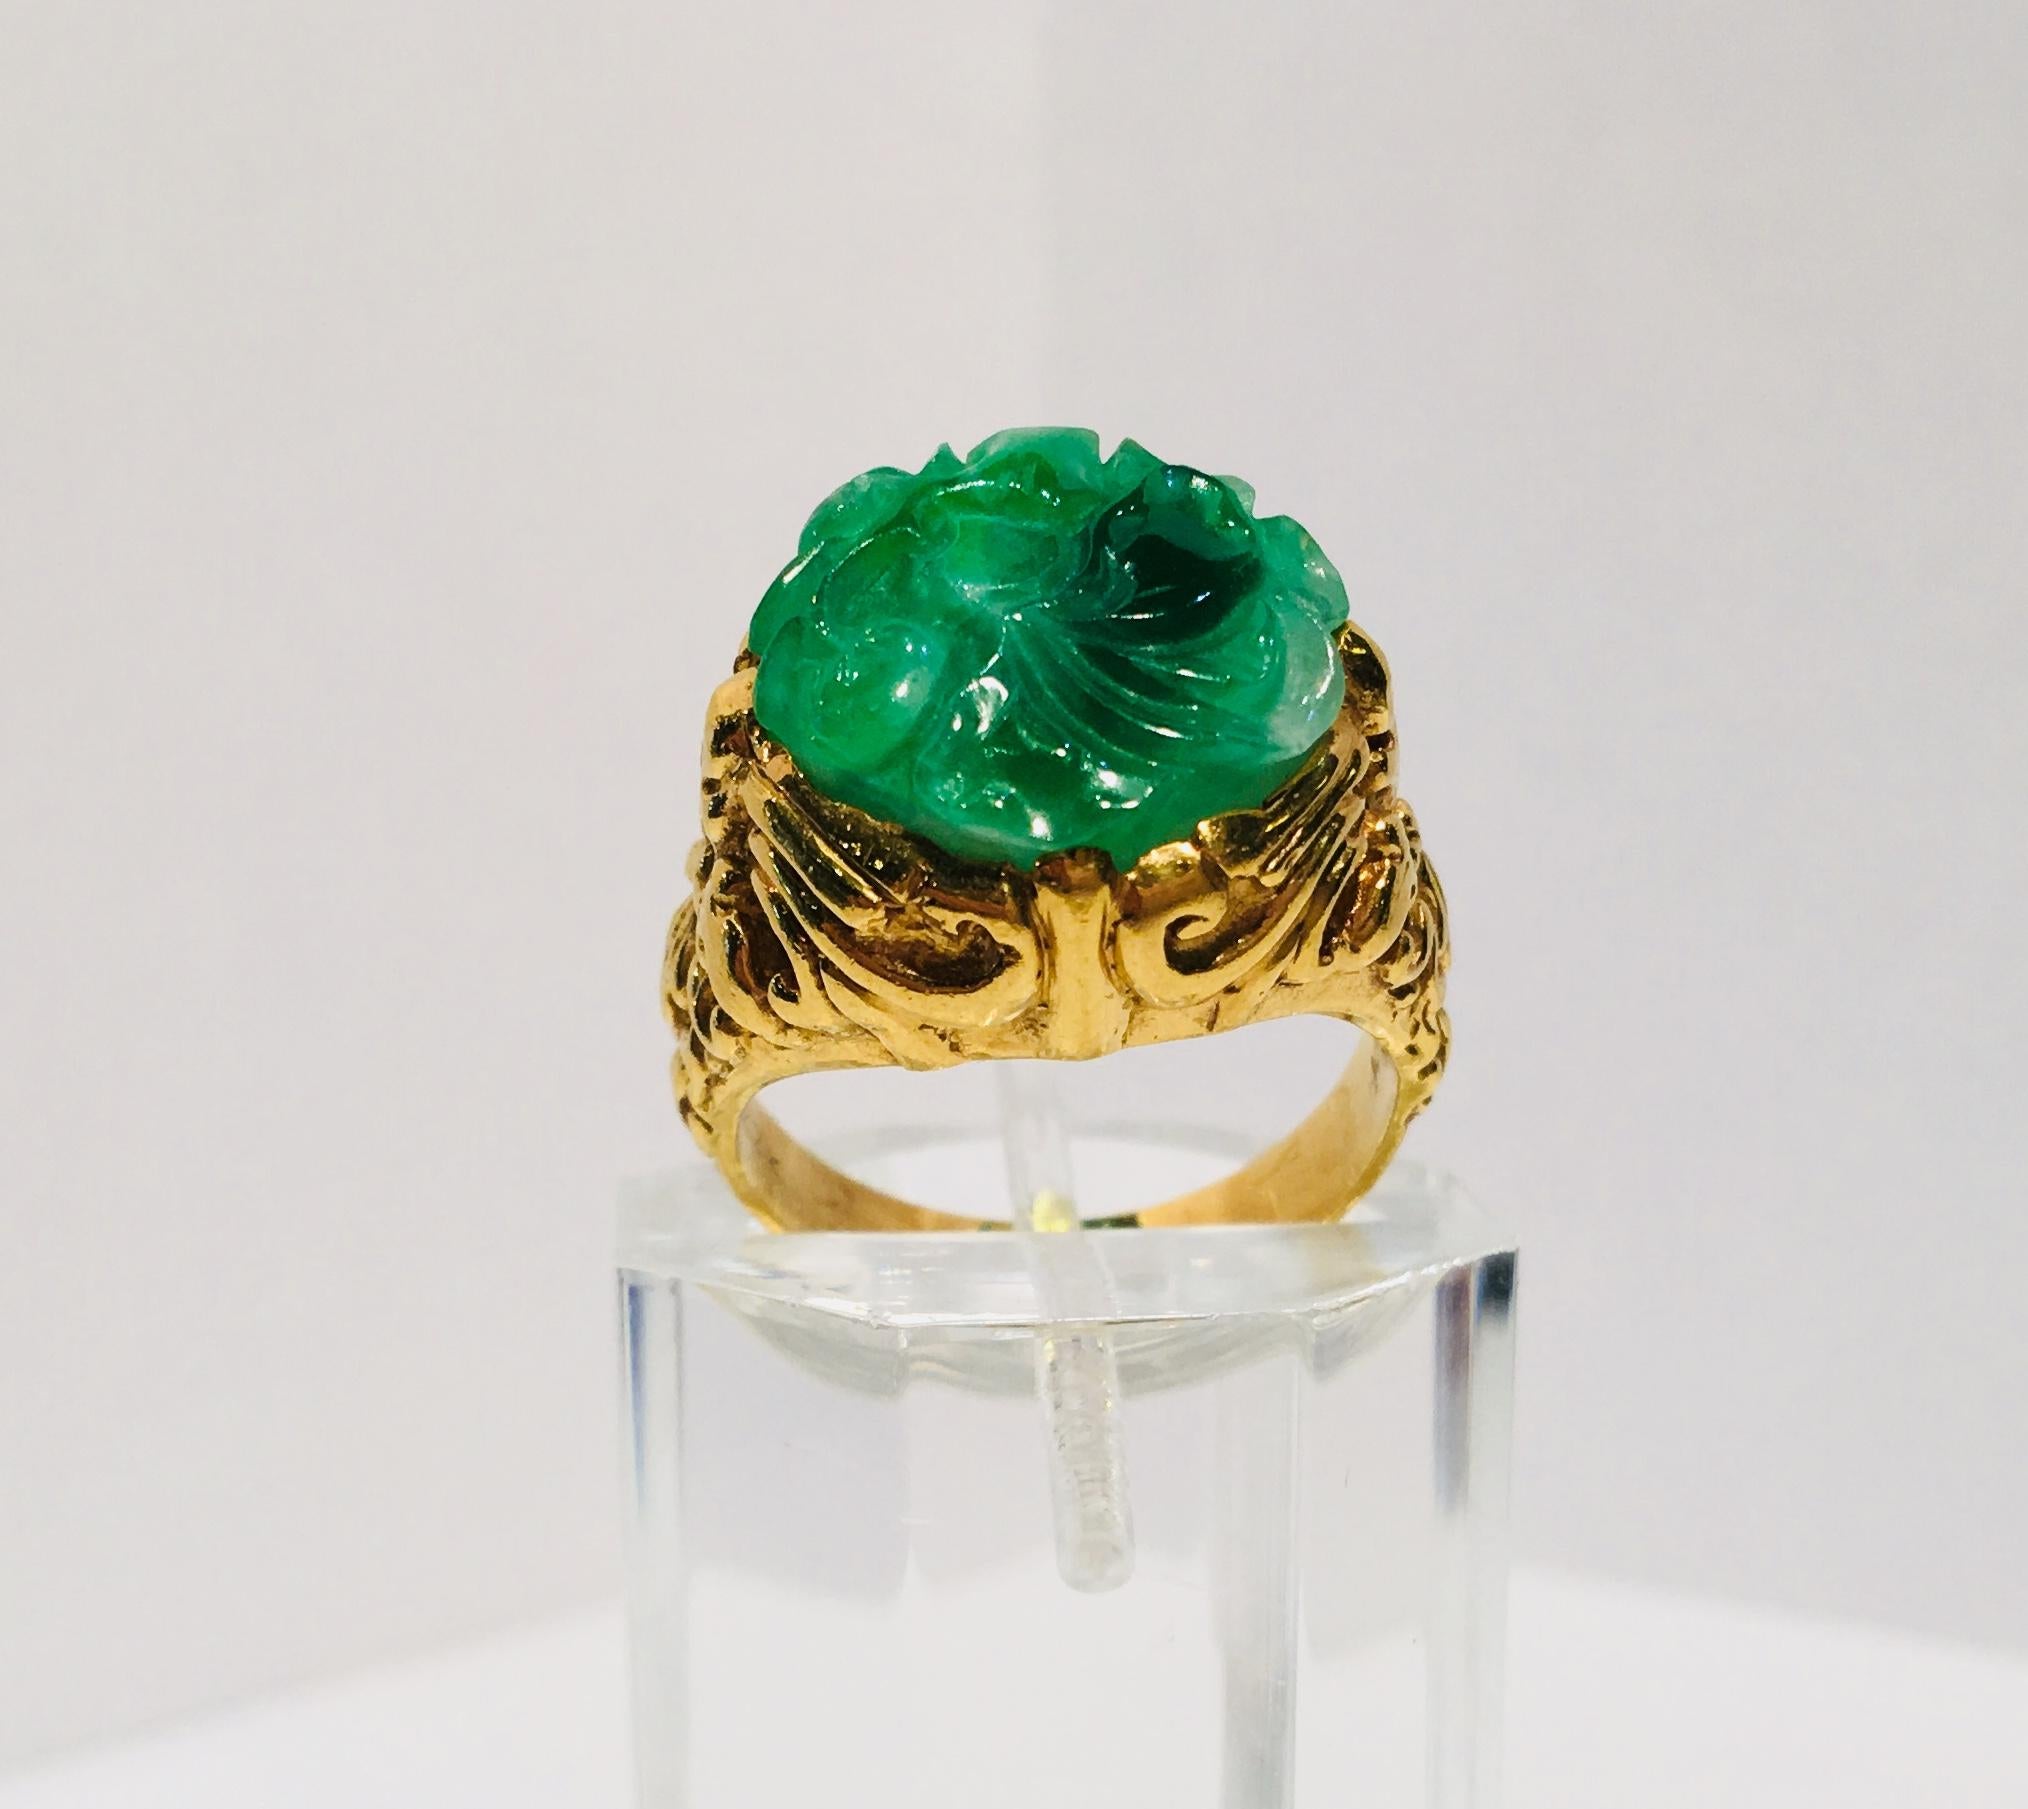 Beautifully detailed, estate, 22 karat heavy yellow gold ring features a bezel-set, variegated, apple green, richly carved, natural jade flower.  The gold work in the mounting includes deeply textured swirls and curlicues.  

Jade flower measures